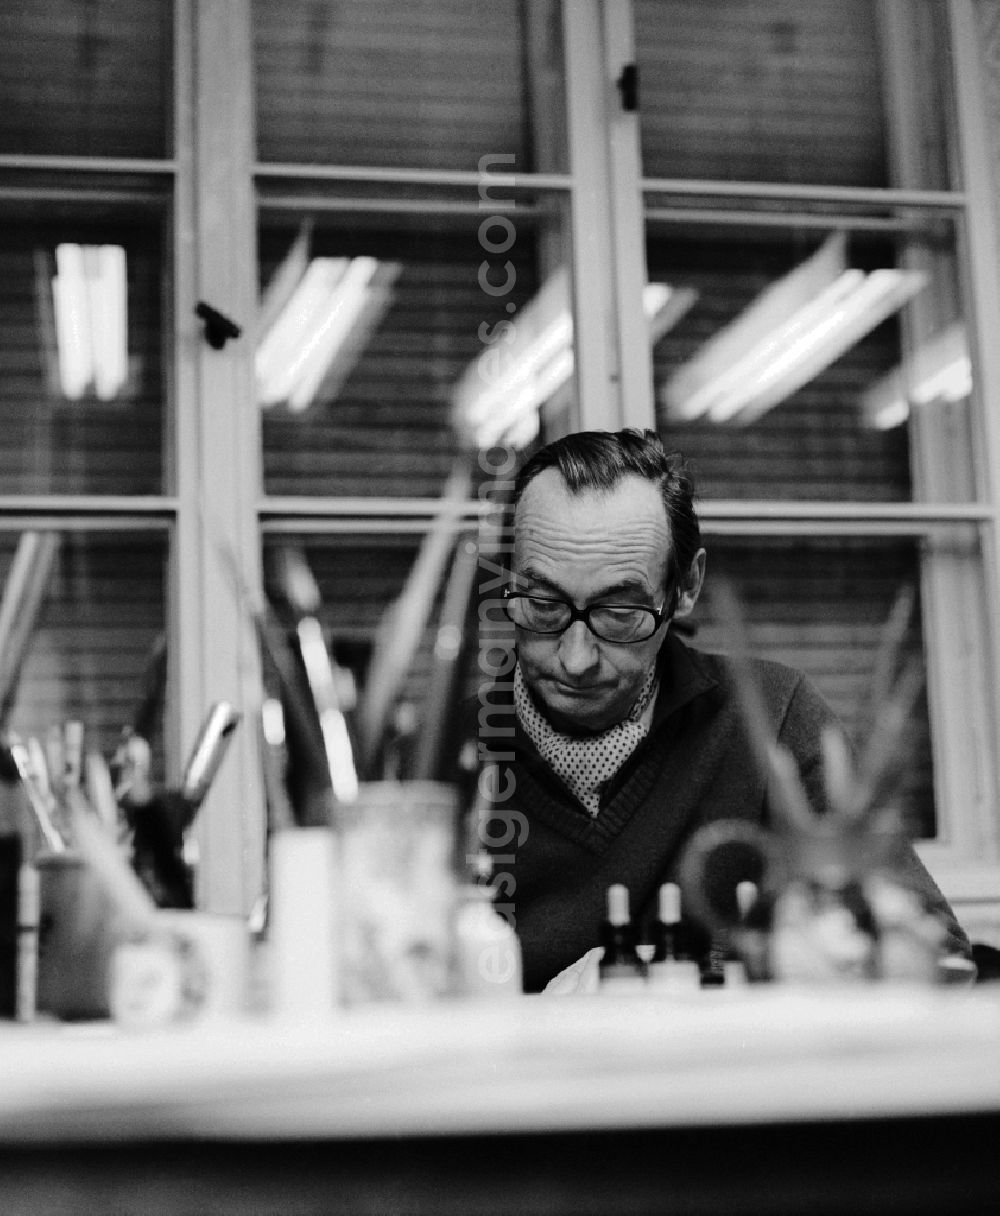 GDR photo archive: Berlin - Professor Werner Klemke (1917 - 1994), a book designer and illustrator, commercial artist and university teacher in the GDR in Berlin, the former capital of the GDR, the German Democratic Republic. Above all, the front pages of the monthly magazine Klemke nationwide have procured popularity. Here in his studio in Berlin-Weissensee